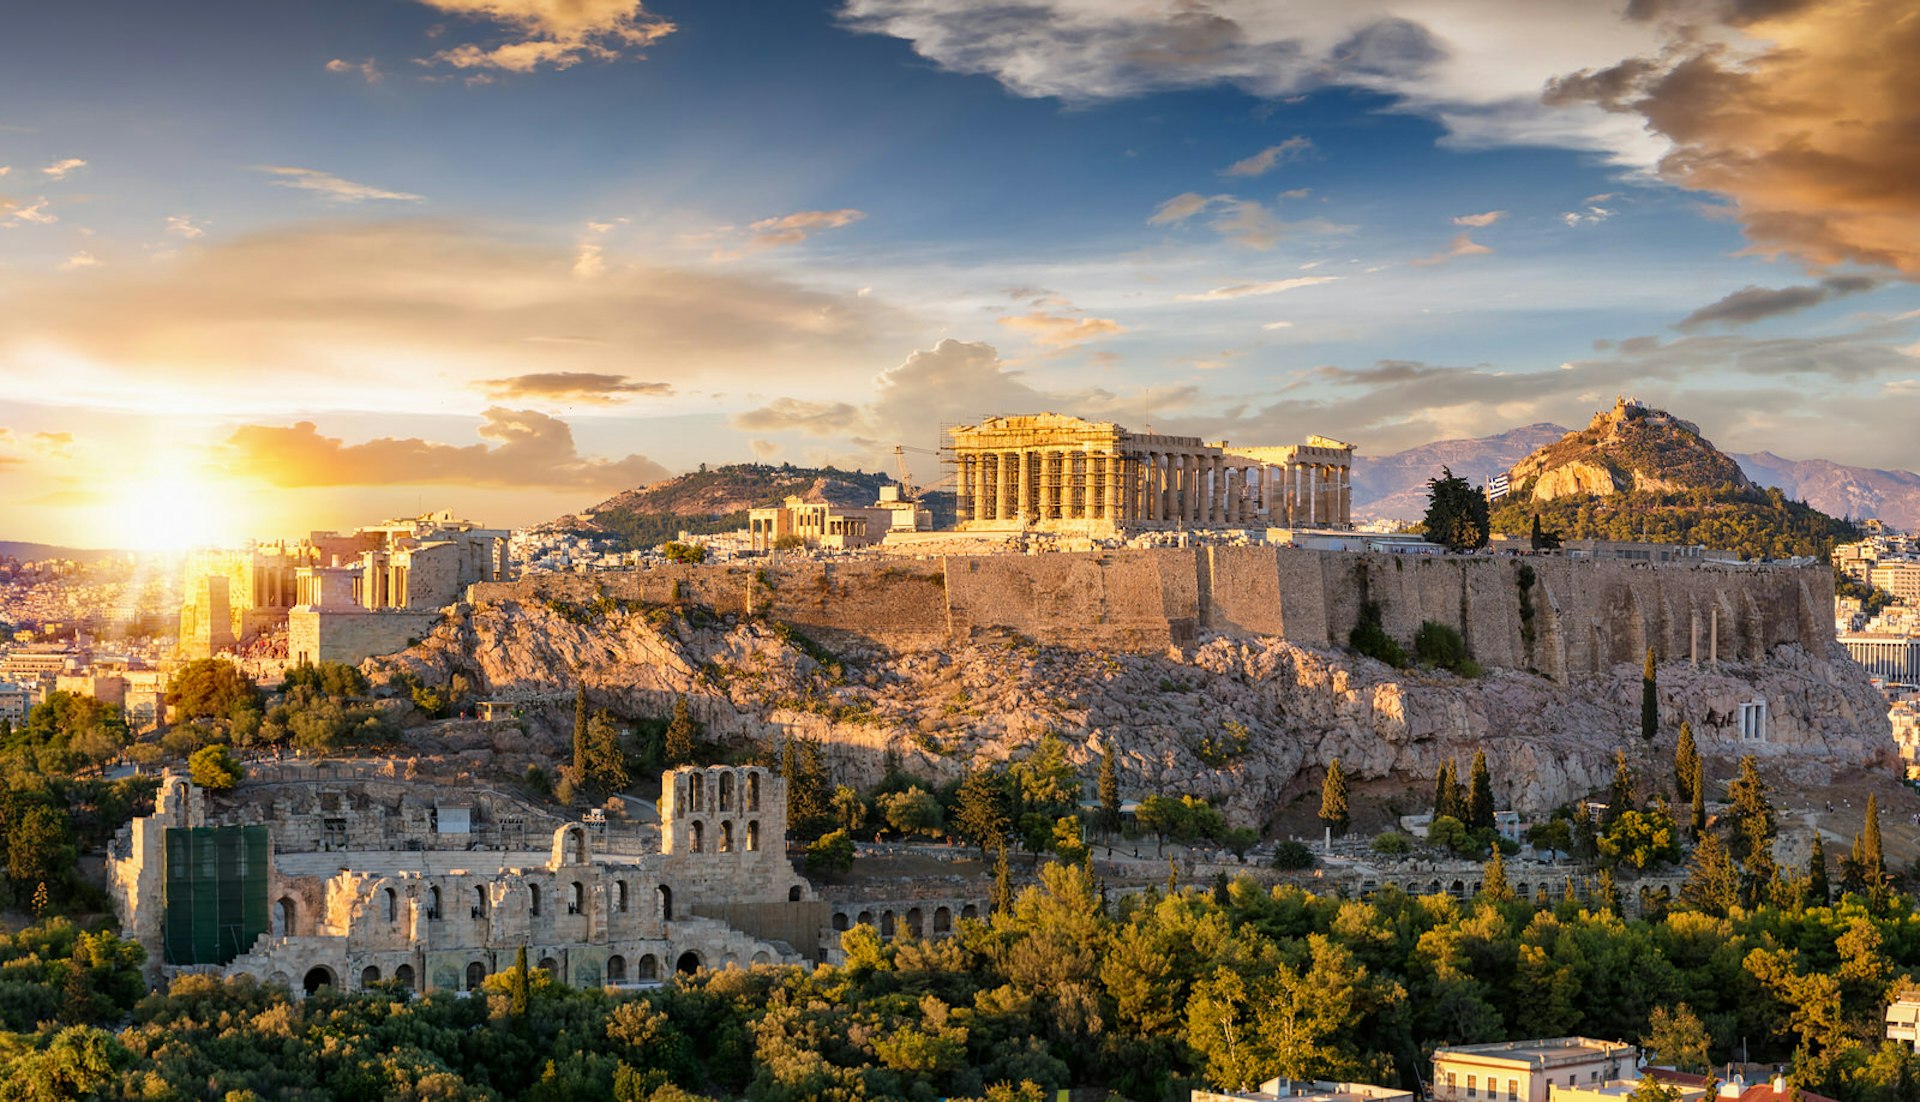 The Acropolis of Athens, Greece, crowned by the columns of the Parthenon temple, on top of a hill during a summer sunset.